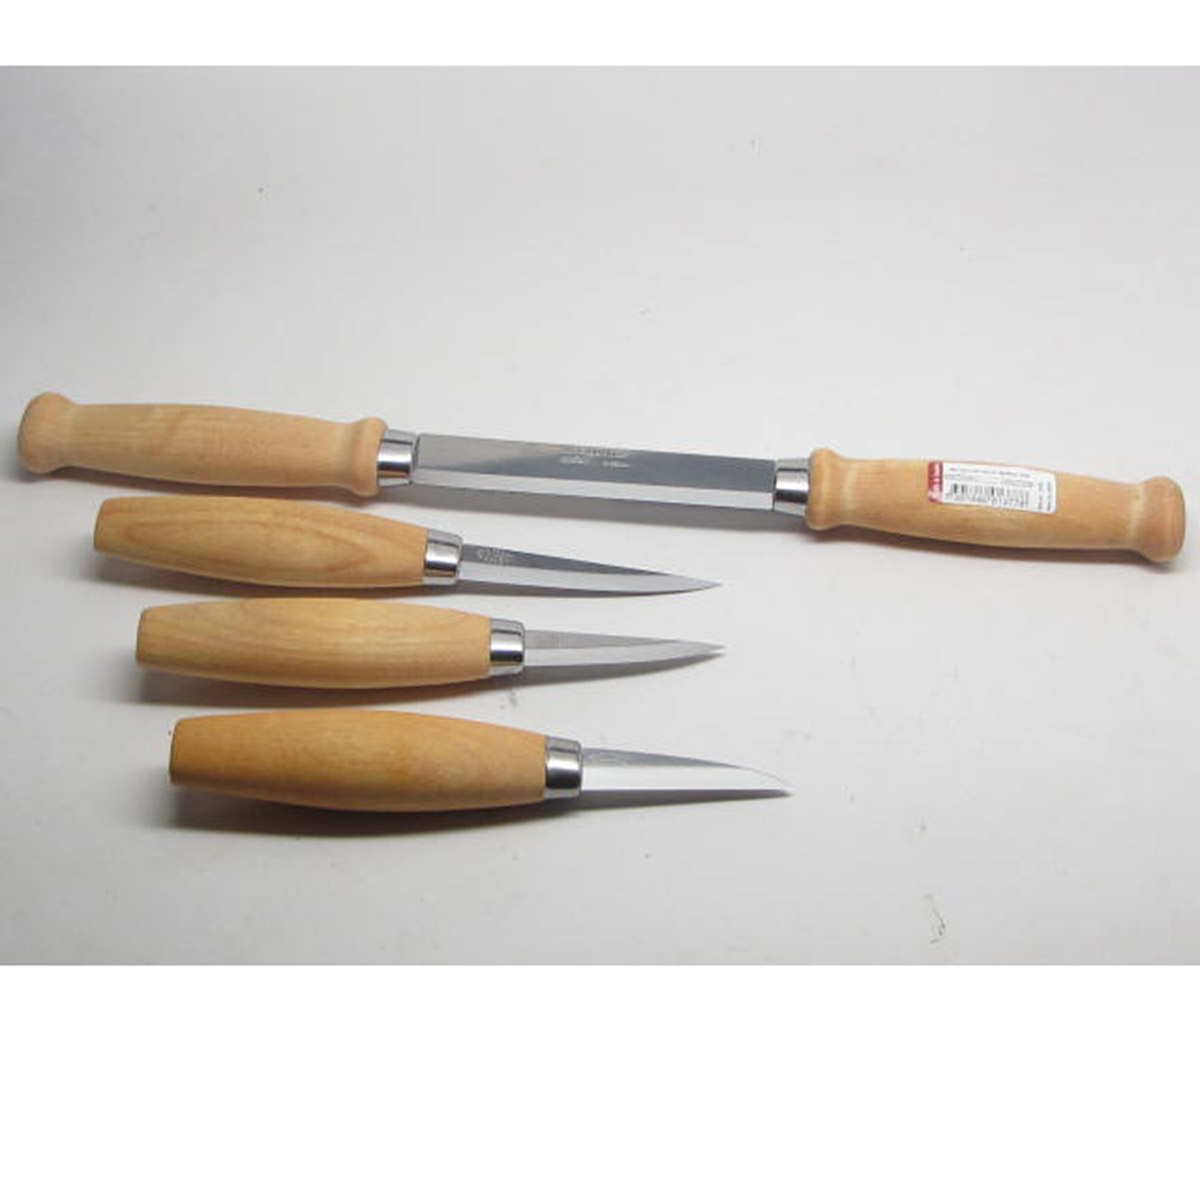 Mora Woodcarving Knives And Splitter 4 Piece Set